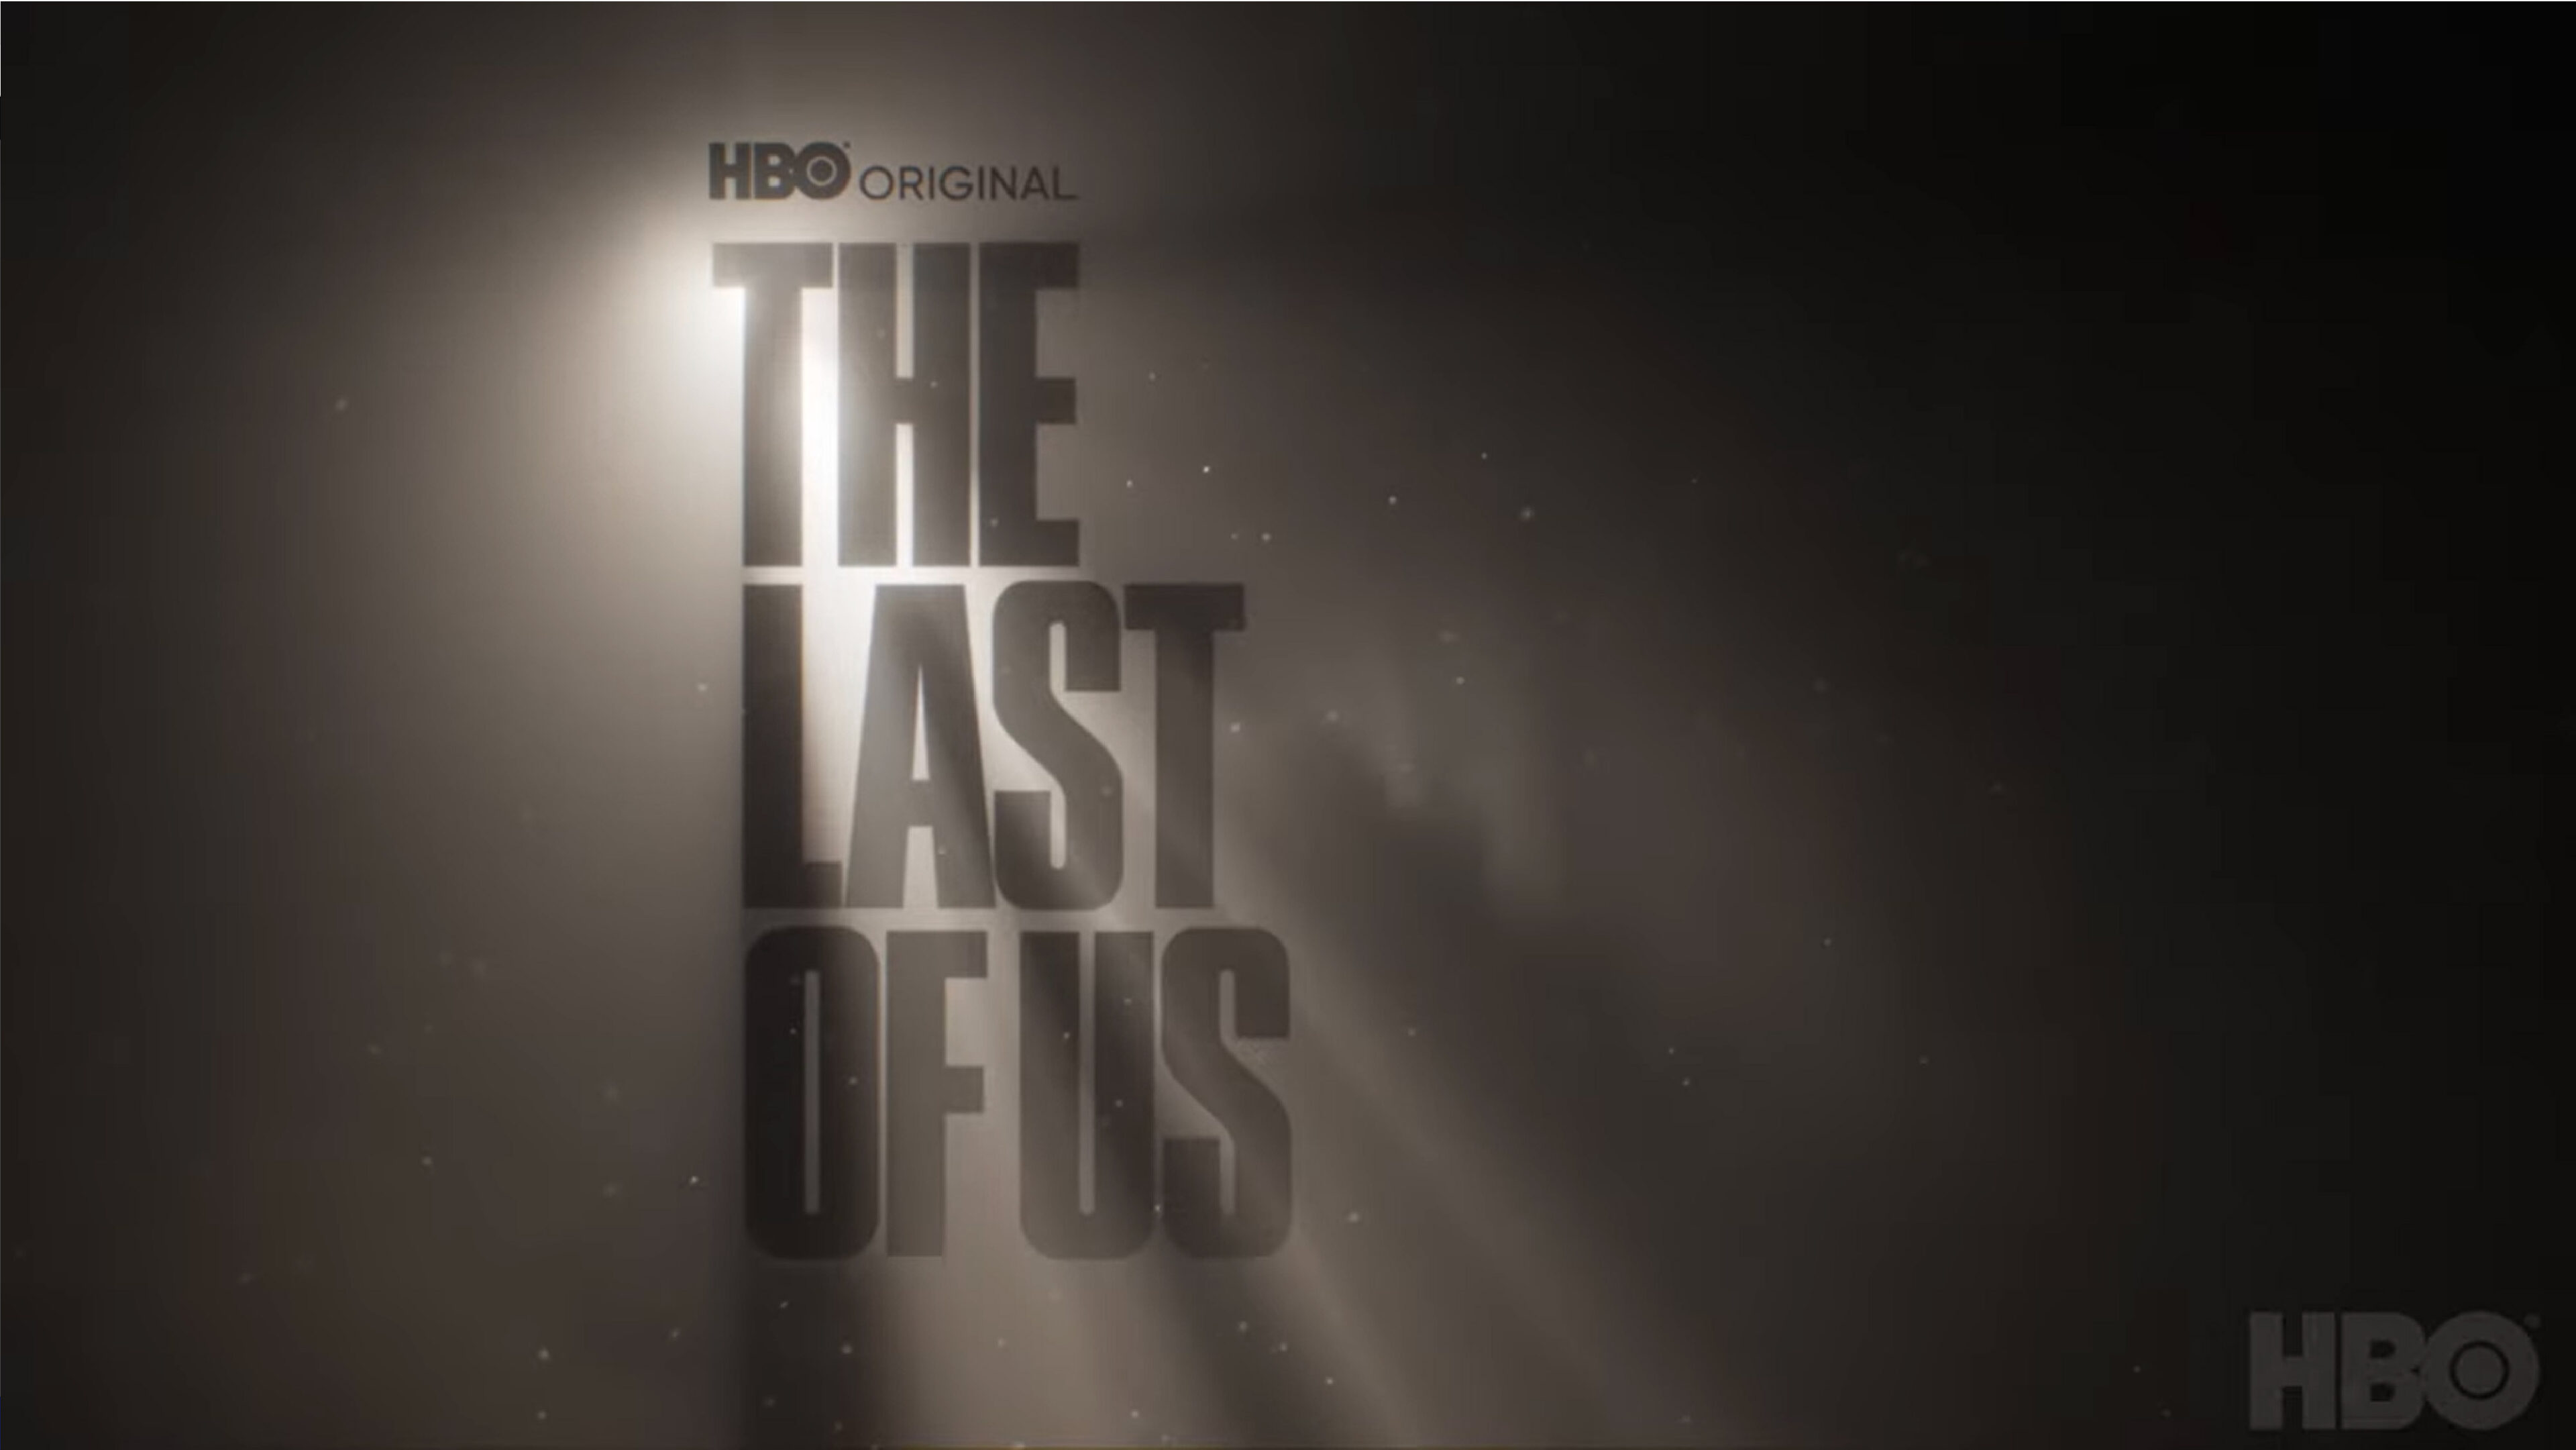 The Last of Us presents the first official teaser trailer